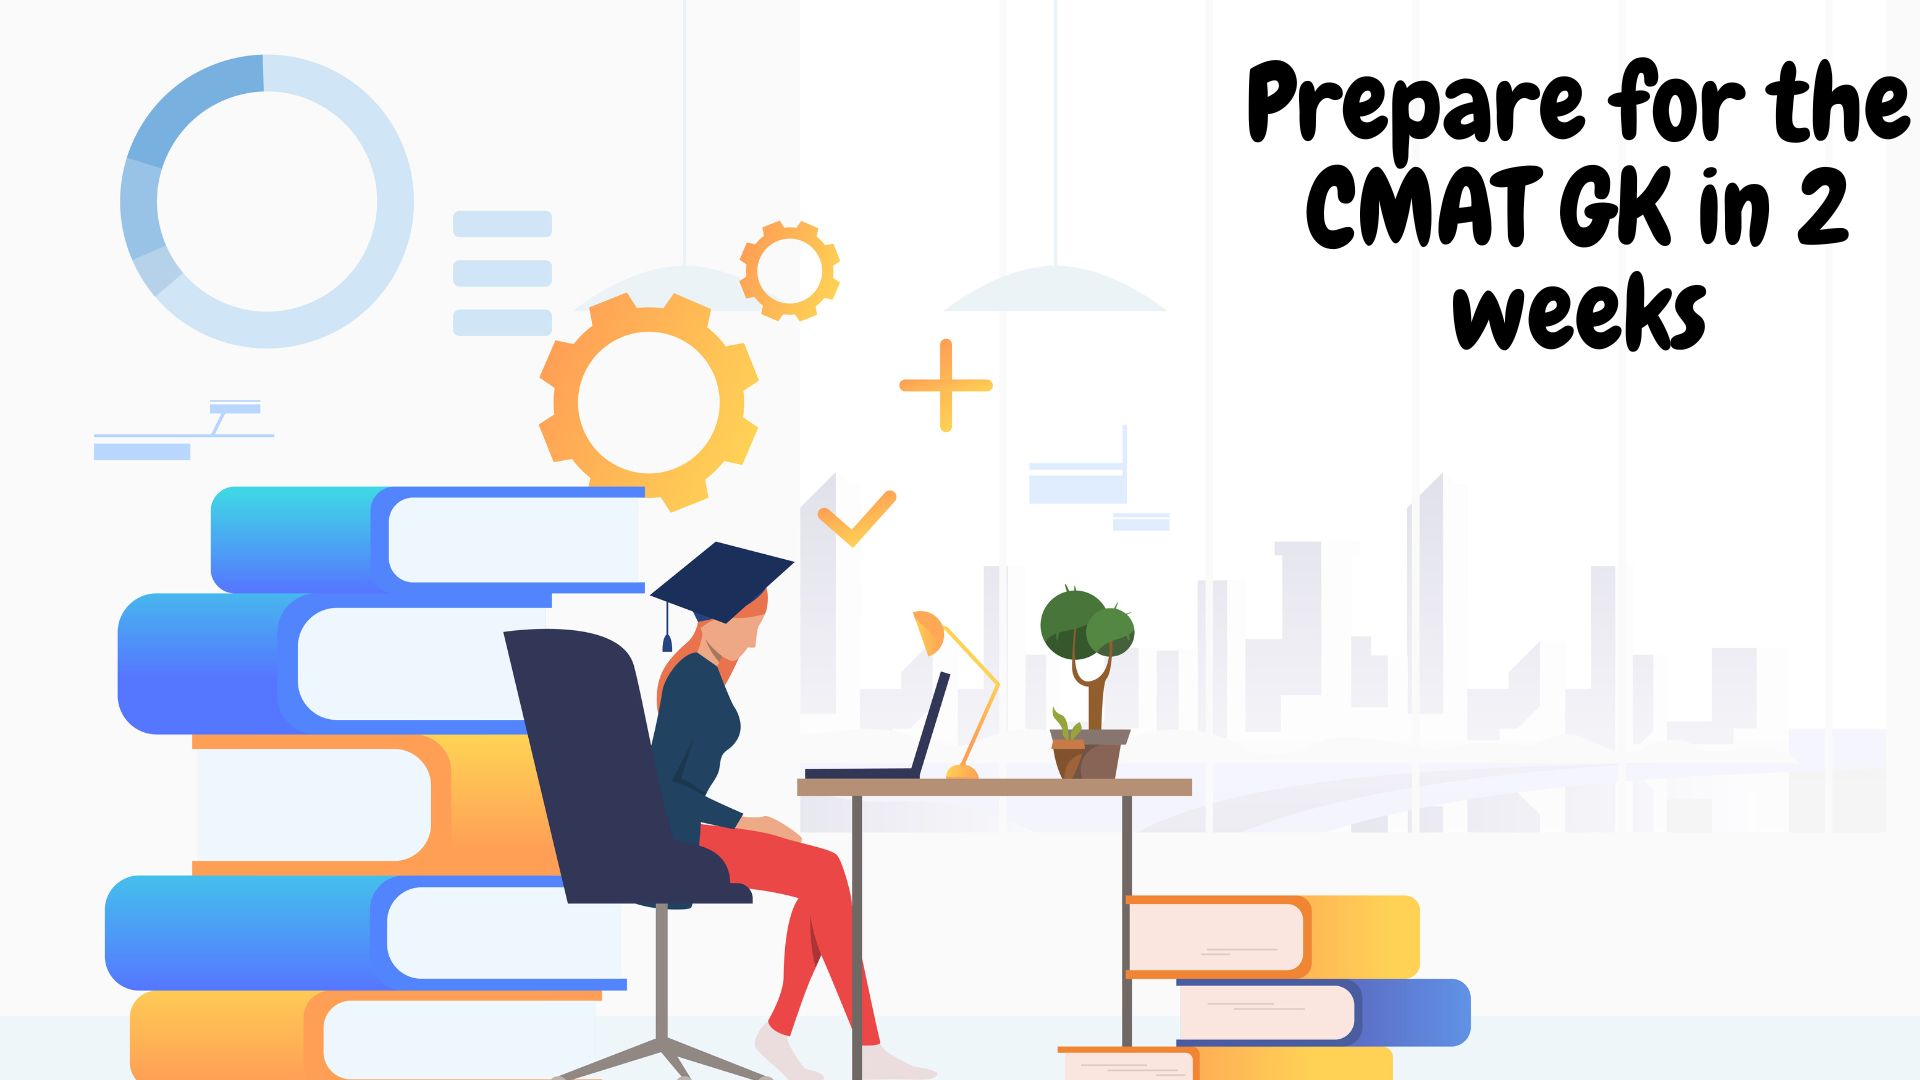 How do I prepare for the CMAT GK in 2 weeks